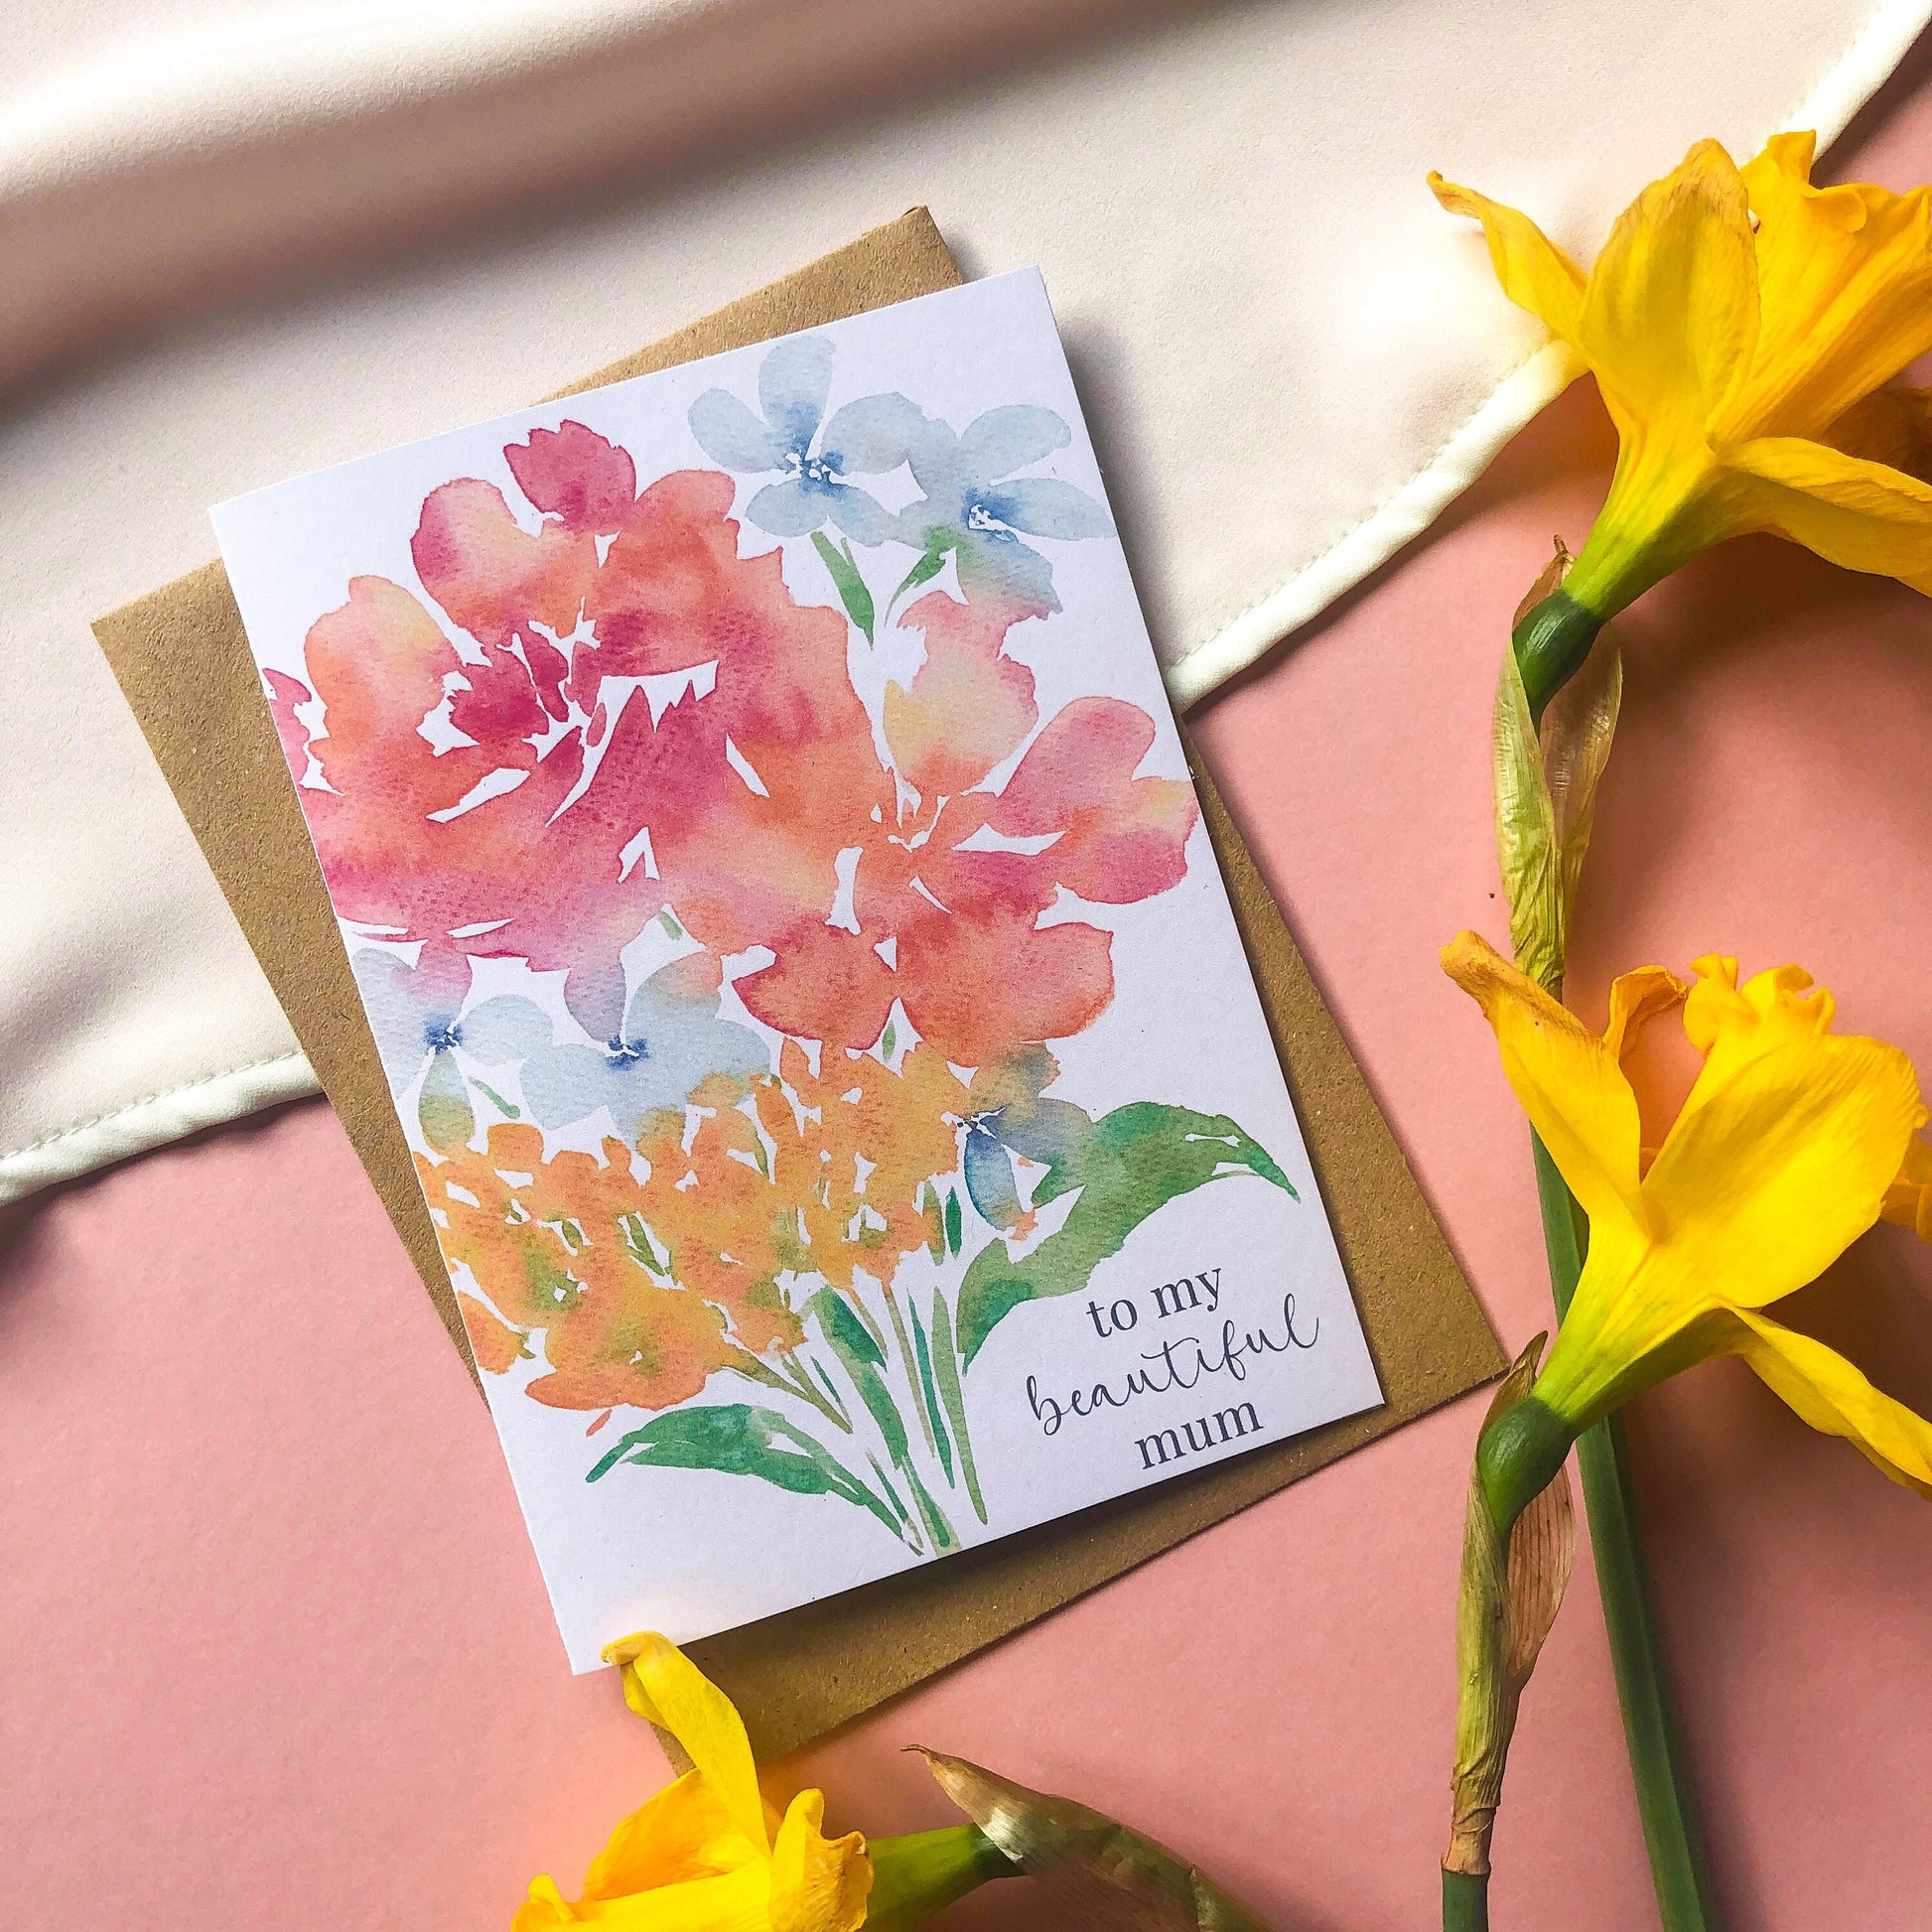 To My Beautiful Mum Mother's Day Card A6 Botanical Birthday Card for Mum, Mother - Colourful Watercolour Flowers Bouquet Cards Eco Friendly